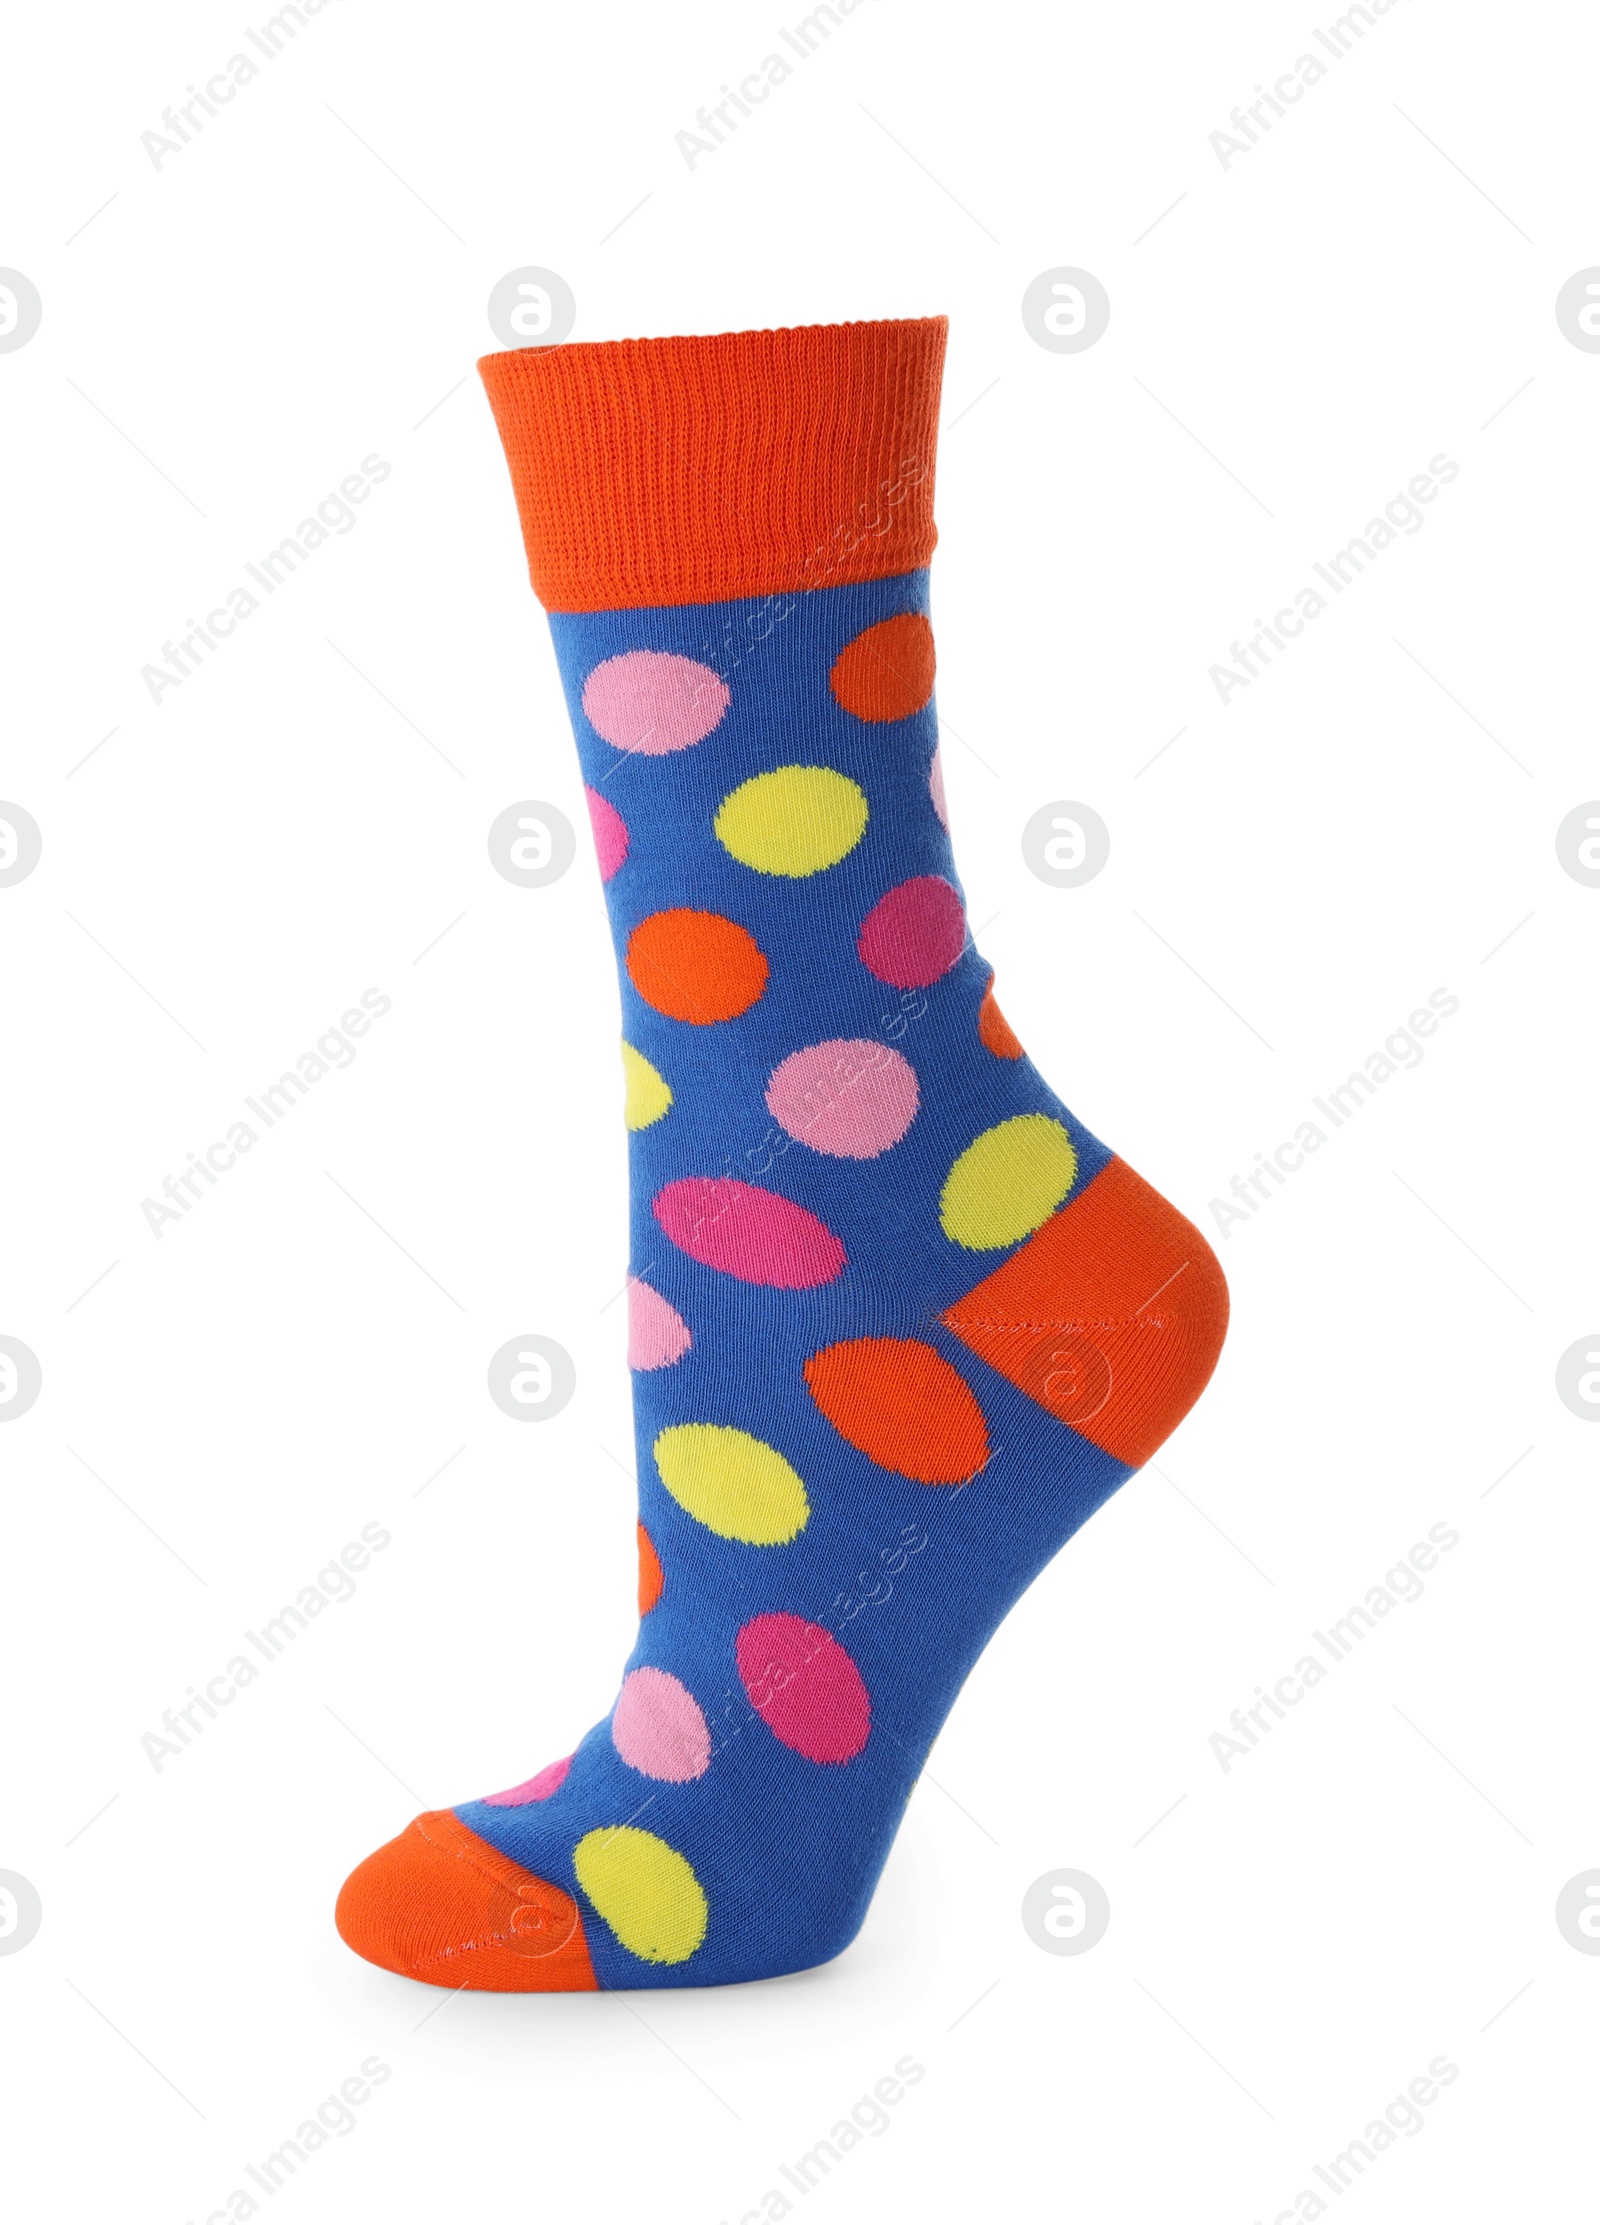 Photo of One new colorful sock isolated on white